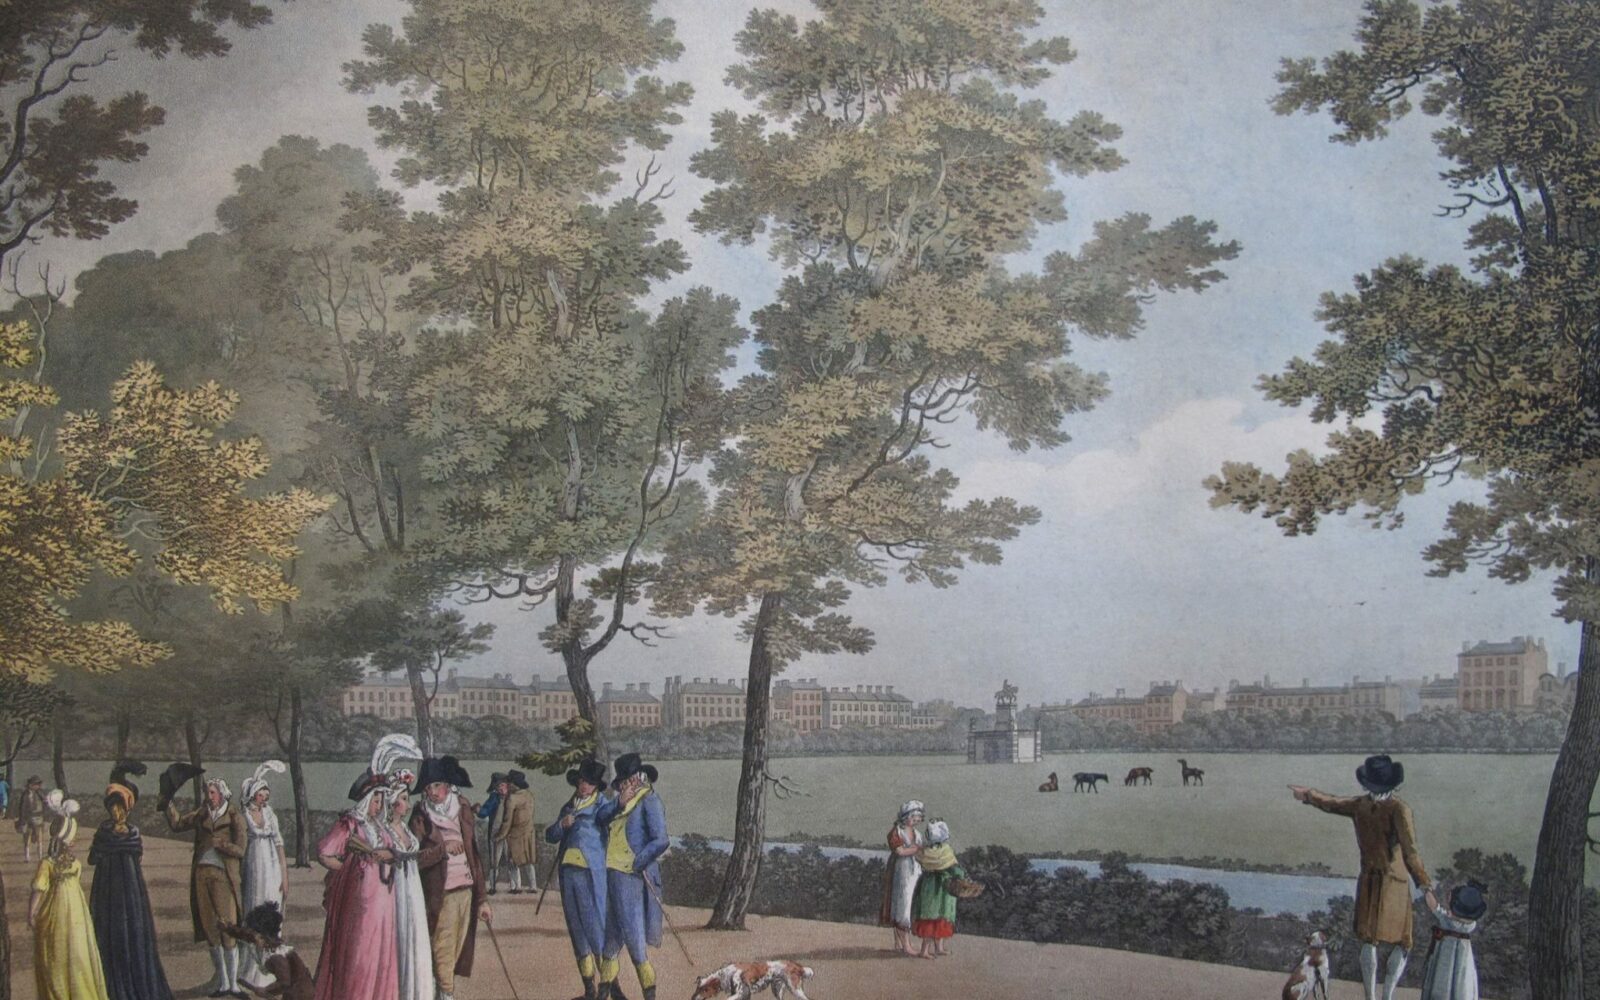 A scene from the 18th century showing people strolling in Stephen's Green, Dublin